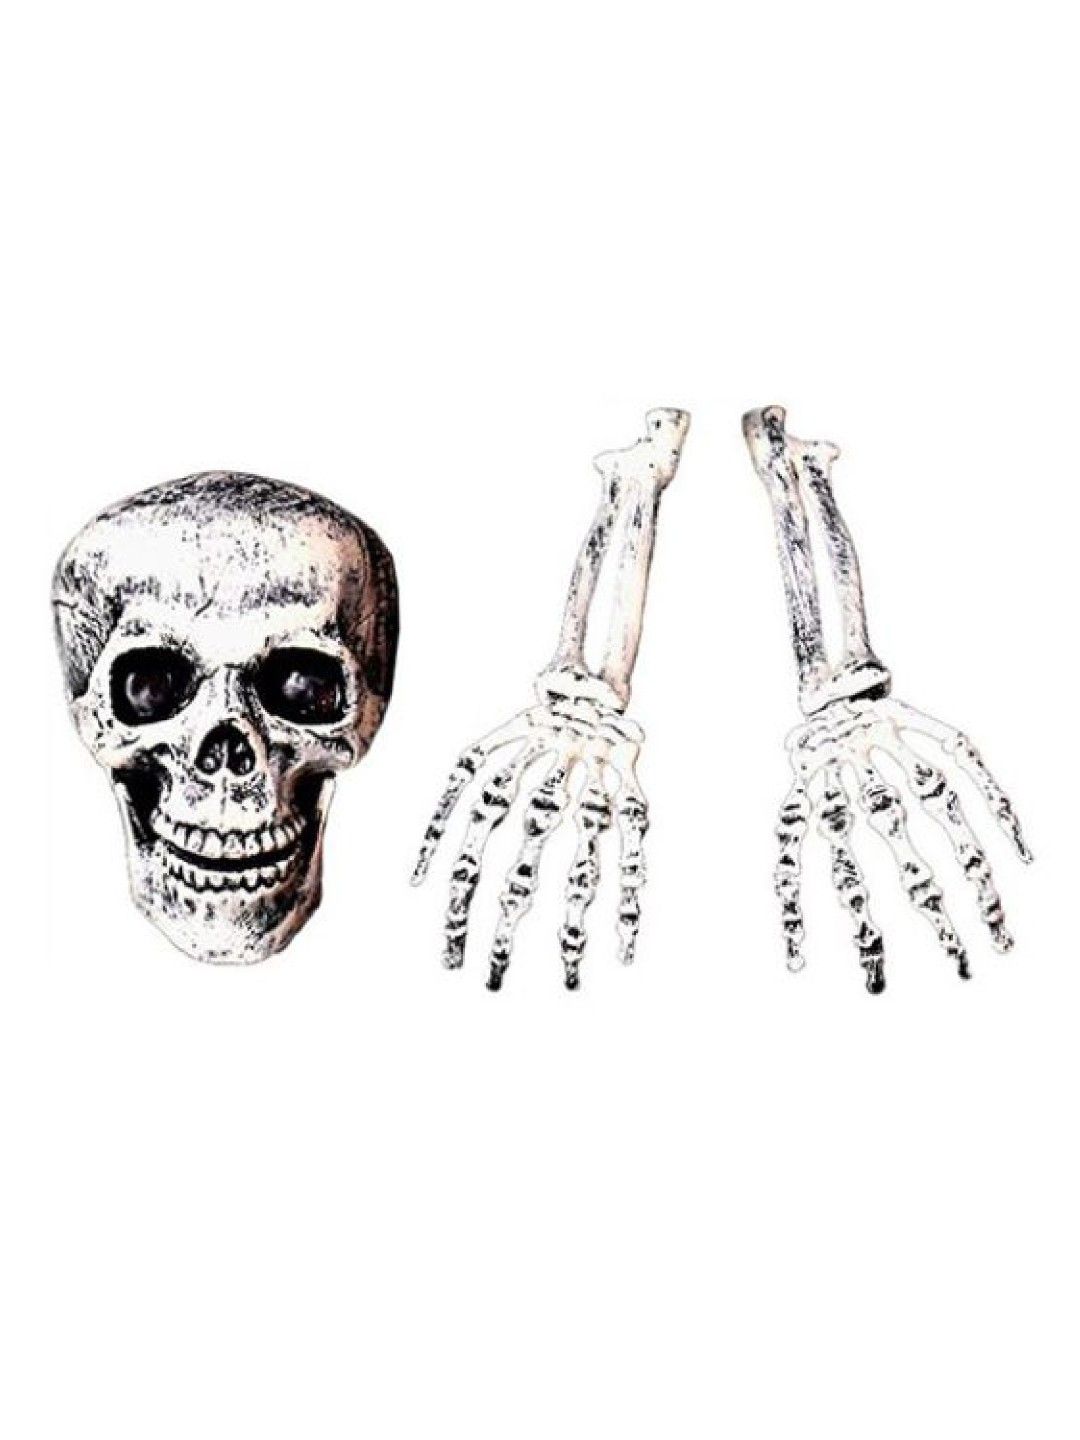 Elves of the Party Halloween Decor: Skeleton Skull and Hands